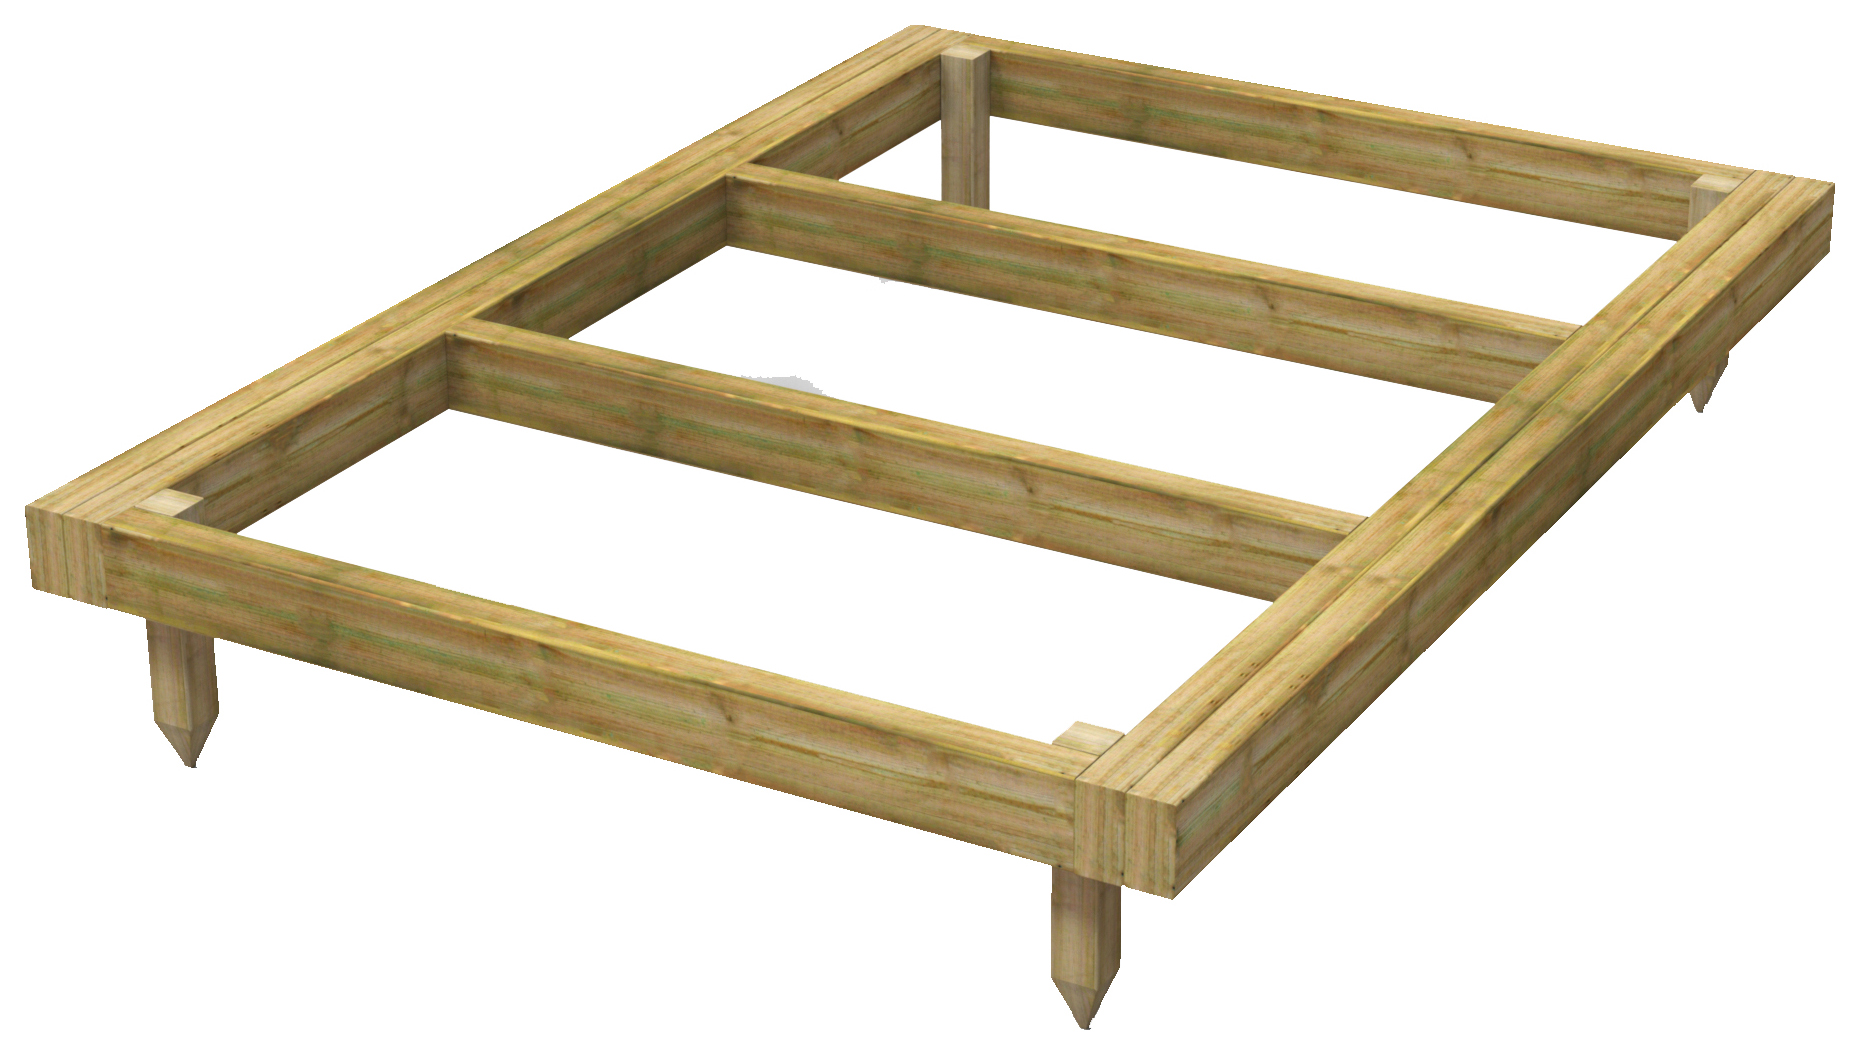 Image of Power Sheds 4 x 6ft Pressure Treated Garden Building Base Kit